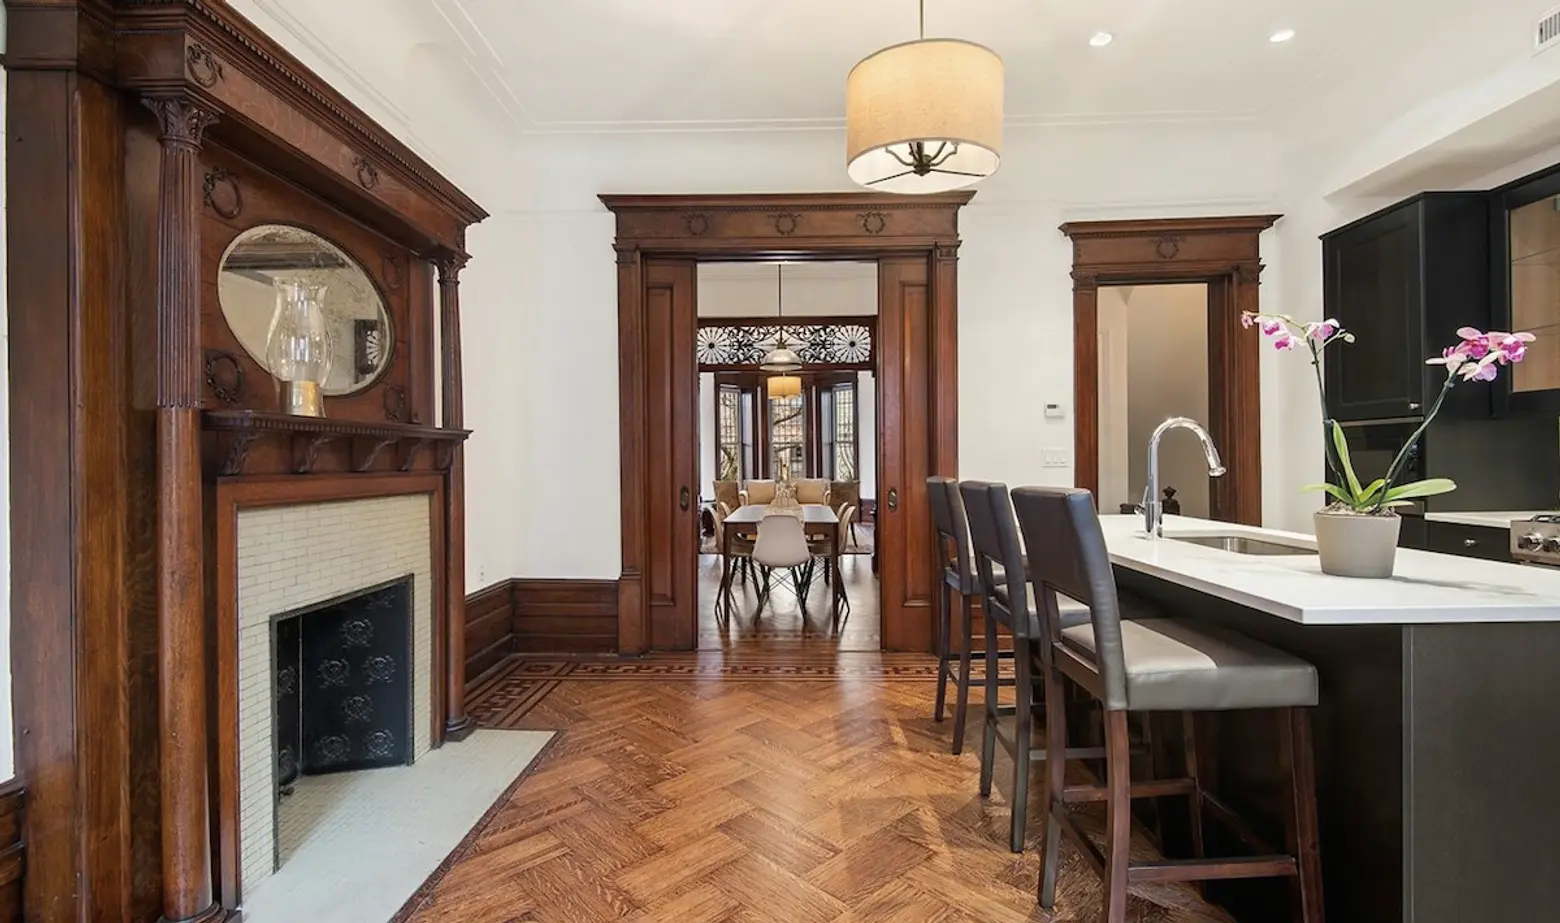 398 Sterling Place, Prospect Heights Historic District, exquisite original millwork